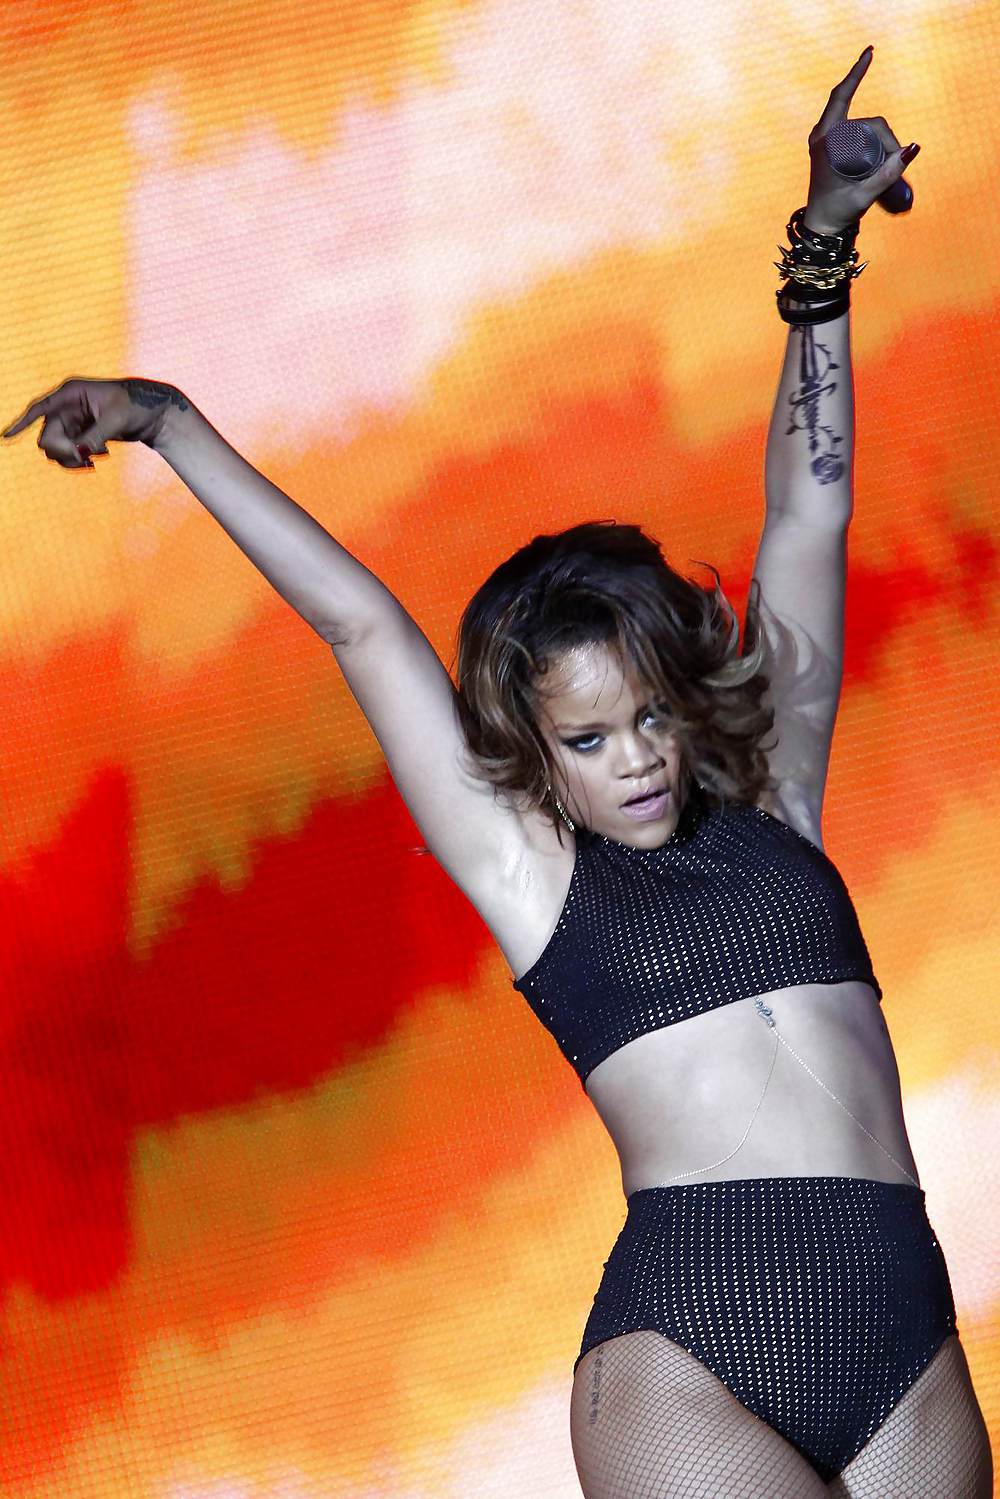 Rihanna performing at the Nilson Nelson Arena in Brazil #5610322